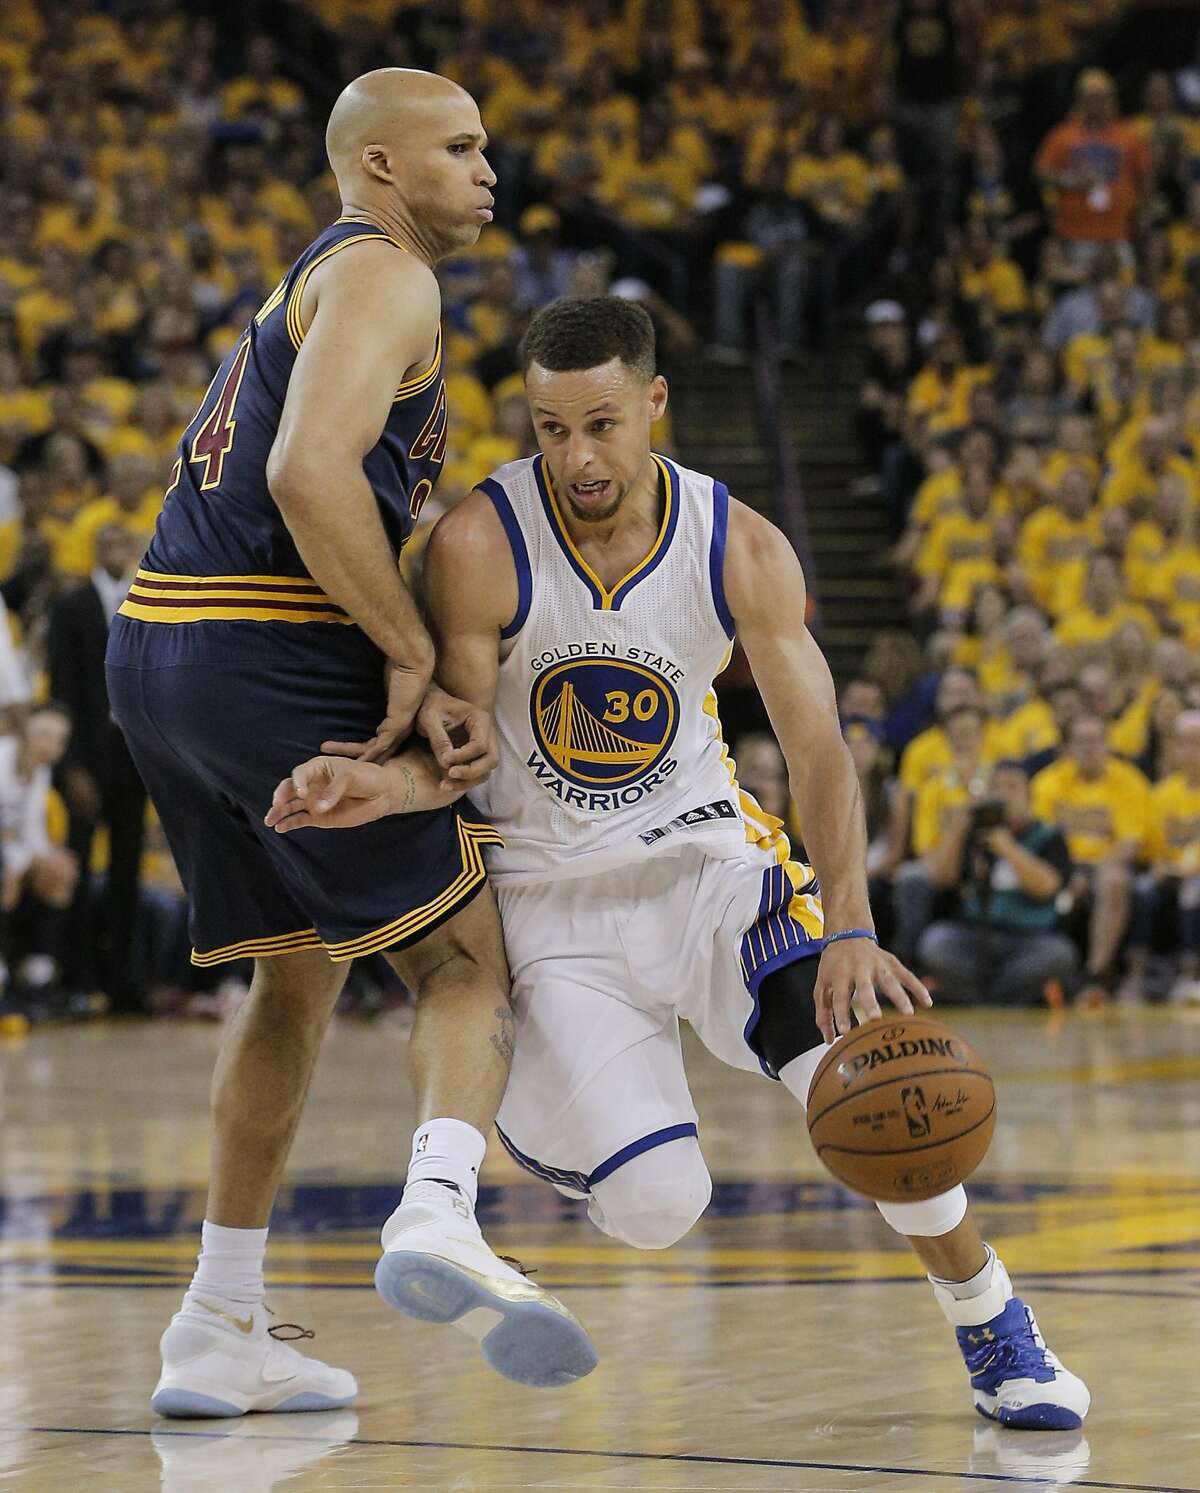 What went wrong for Steph Curry in the 2016 NBA Finals?